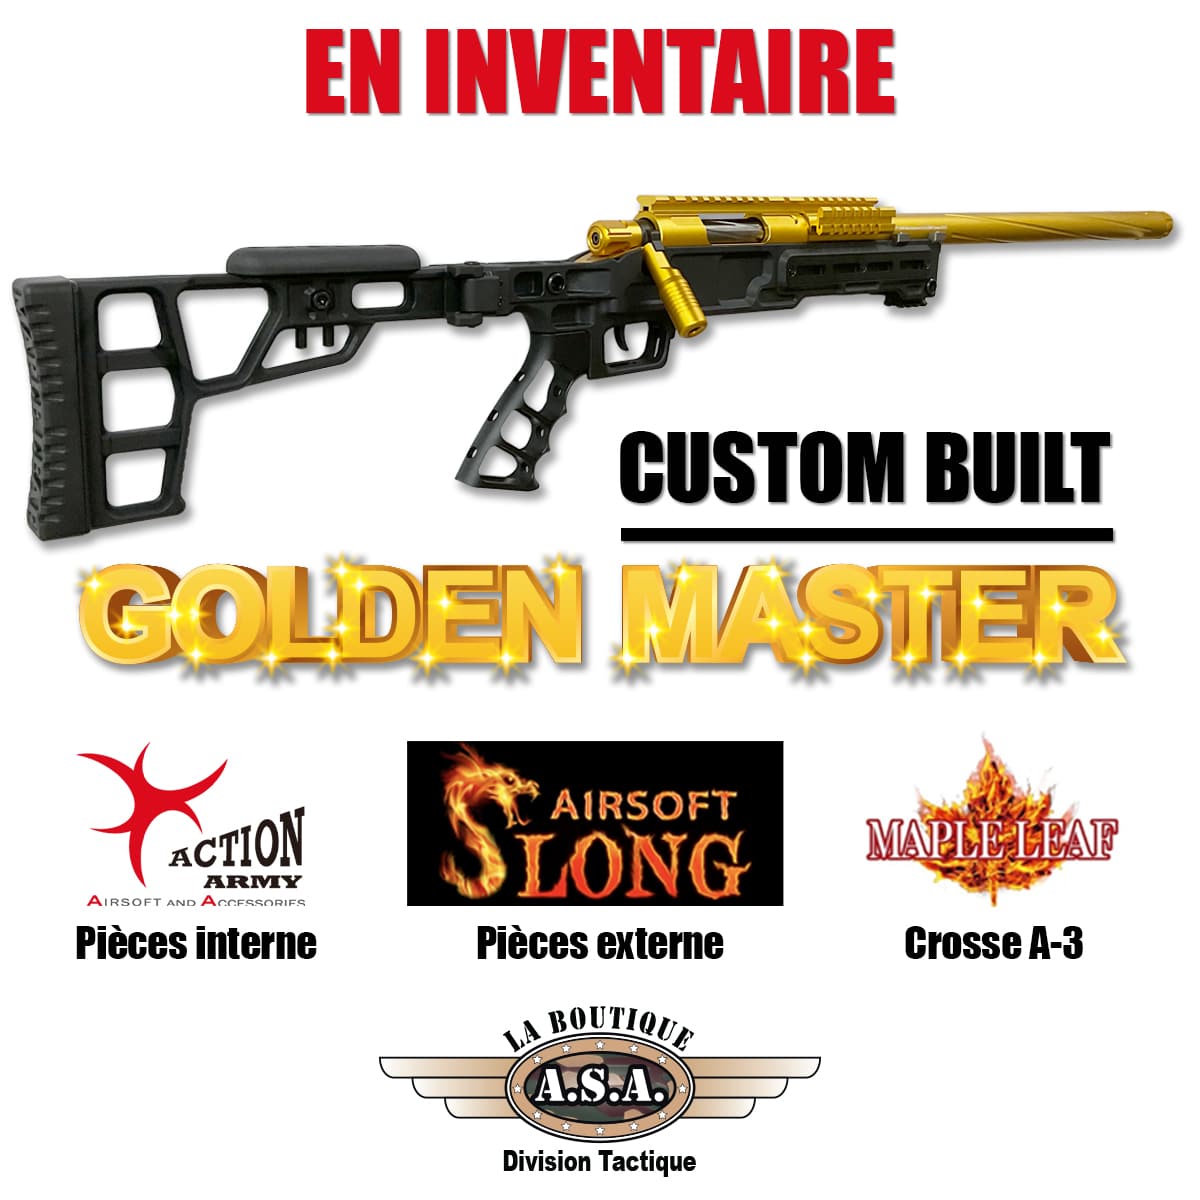 CROSSE RÉTRACTABLE AIRSOFT SNIPER GOLDEN MASTER ASA AIRSOFT SLONG MAPLE LEAF ACTION ARMY